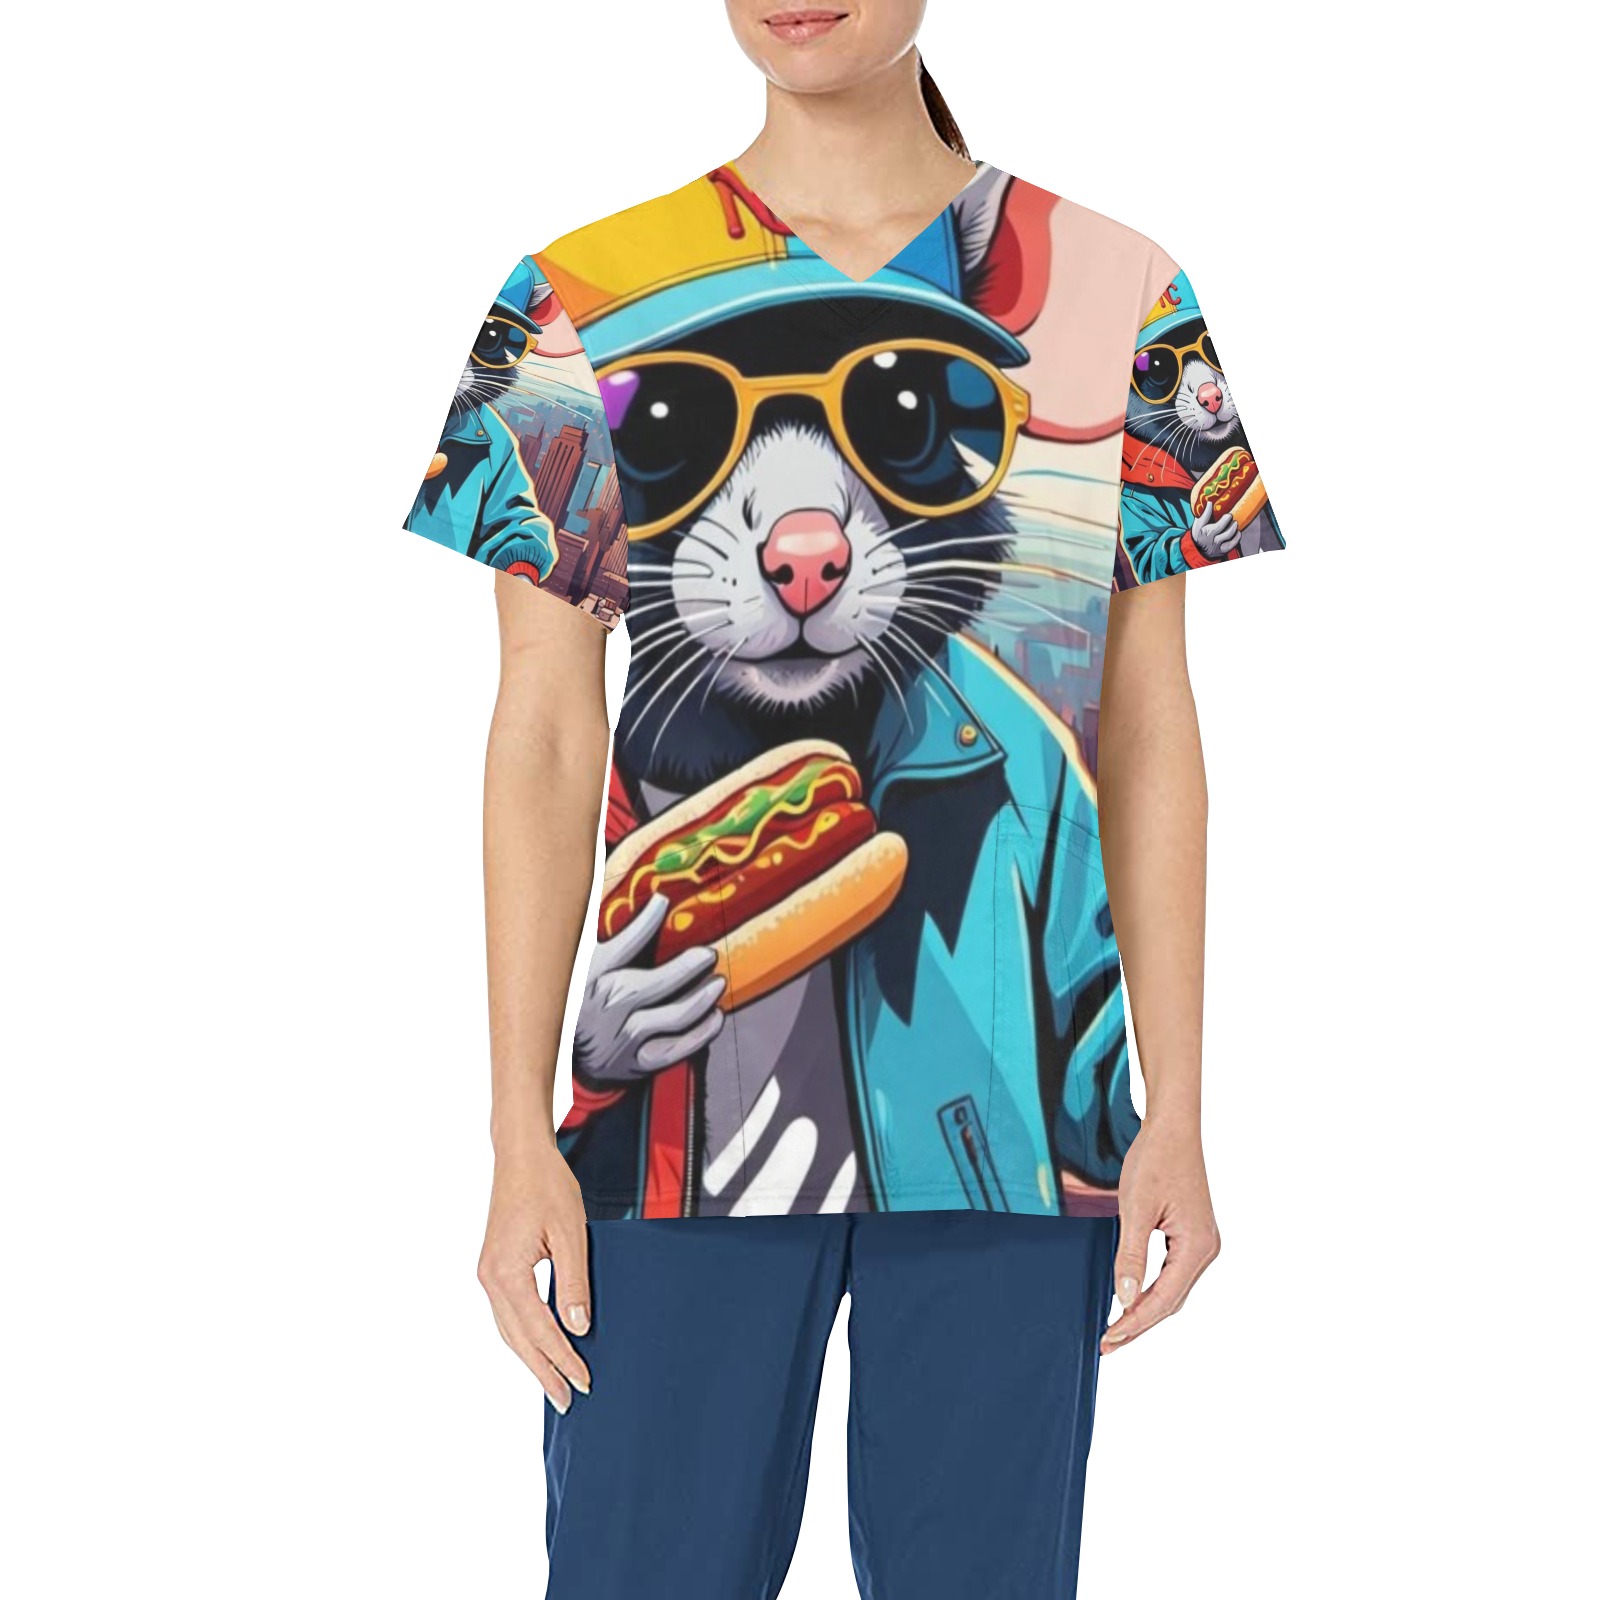 HOT DOG EATING NYC RAT 2 All Over Print Scrub Top